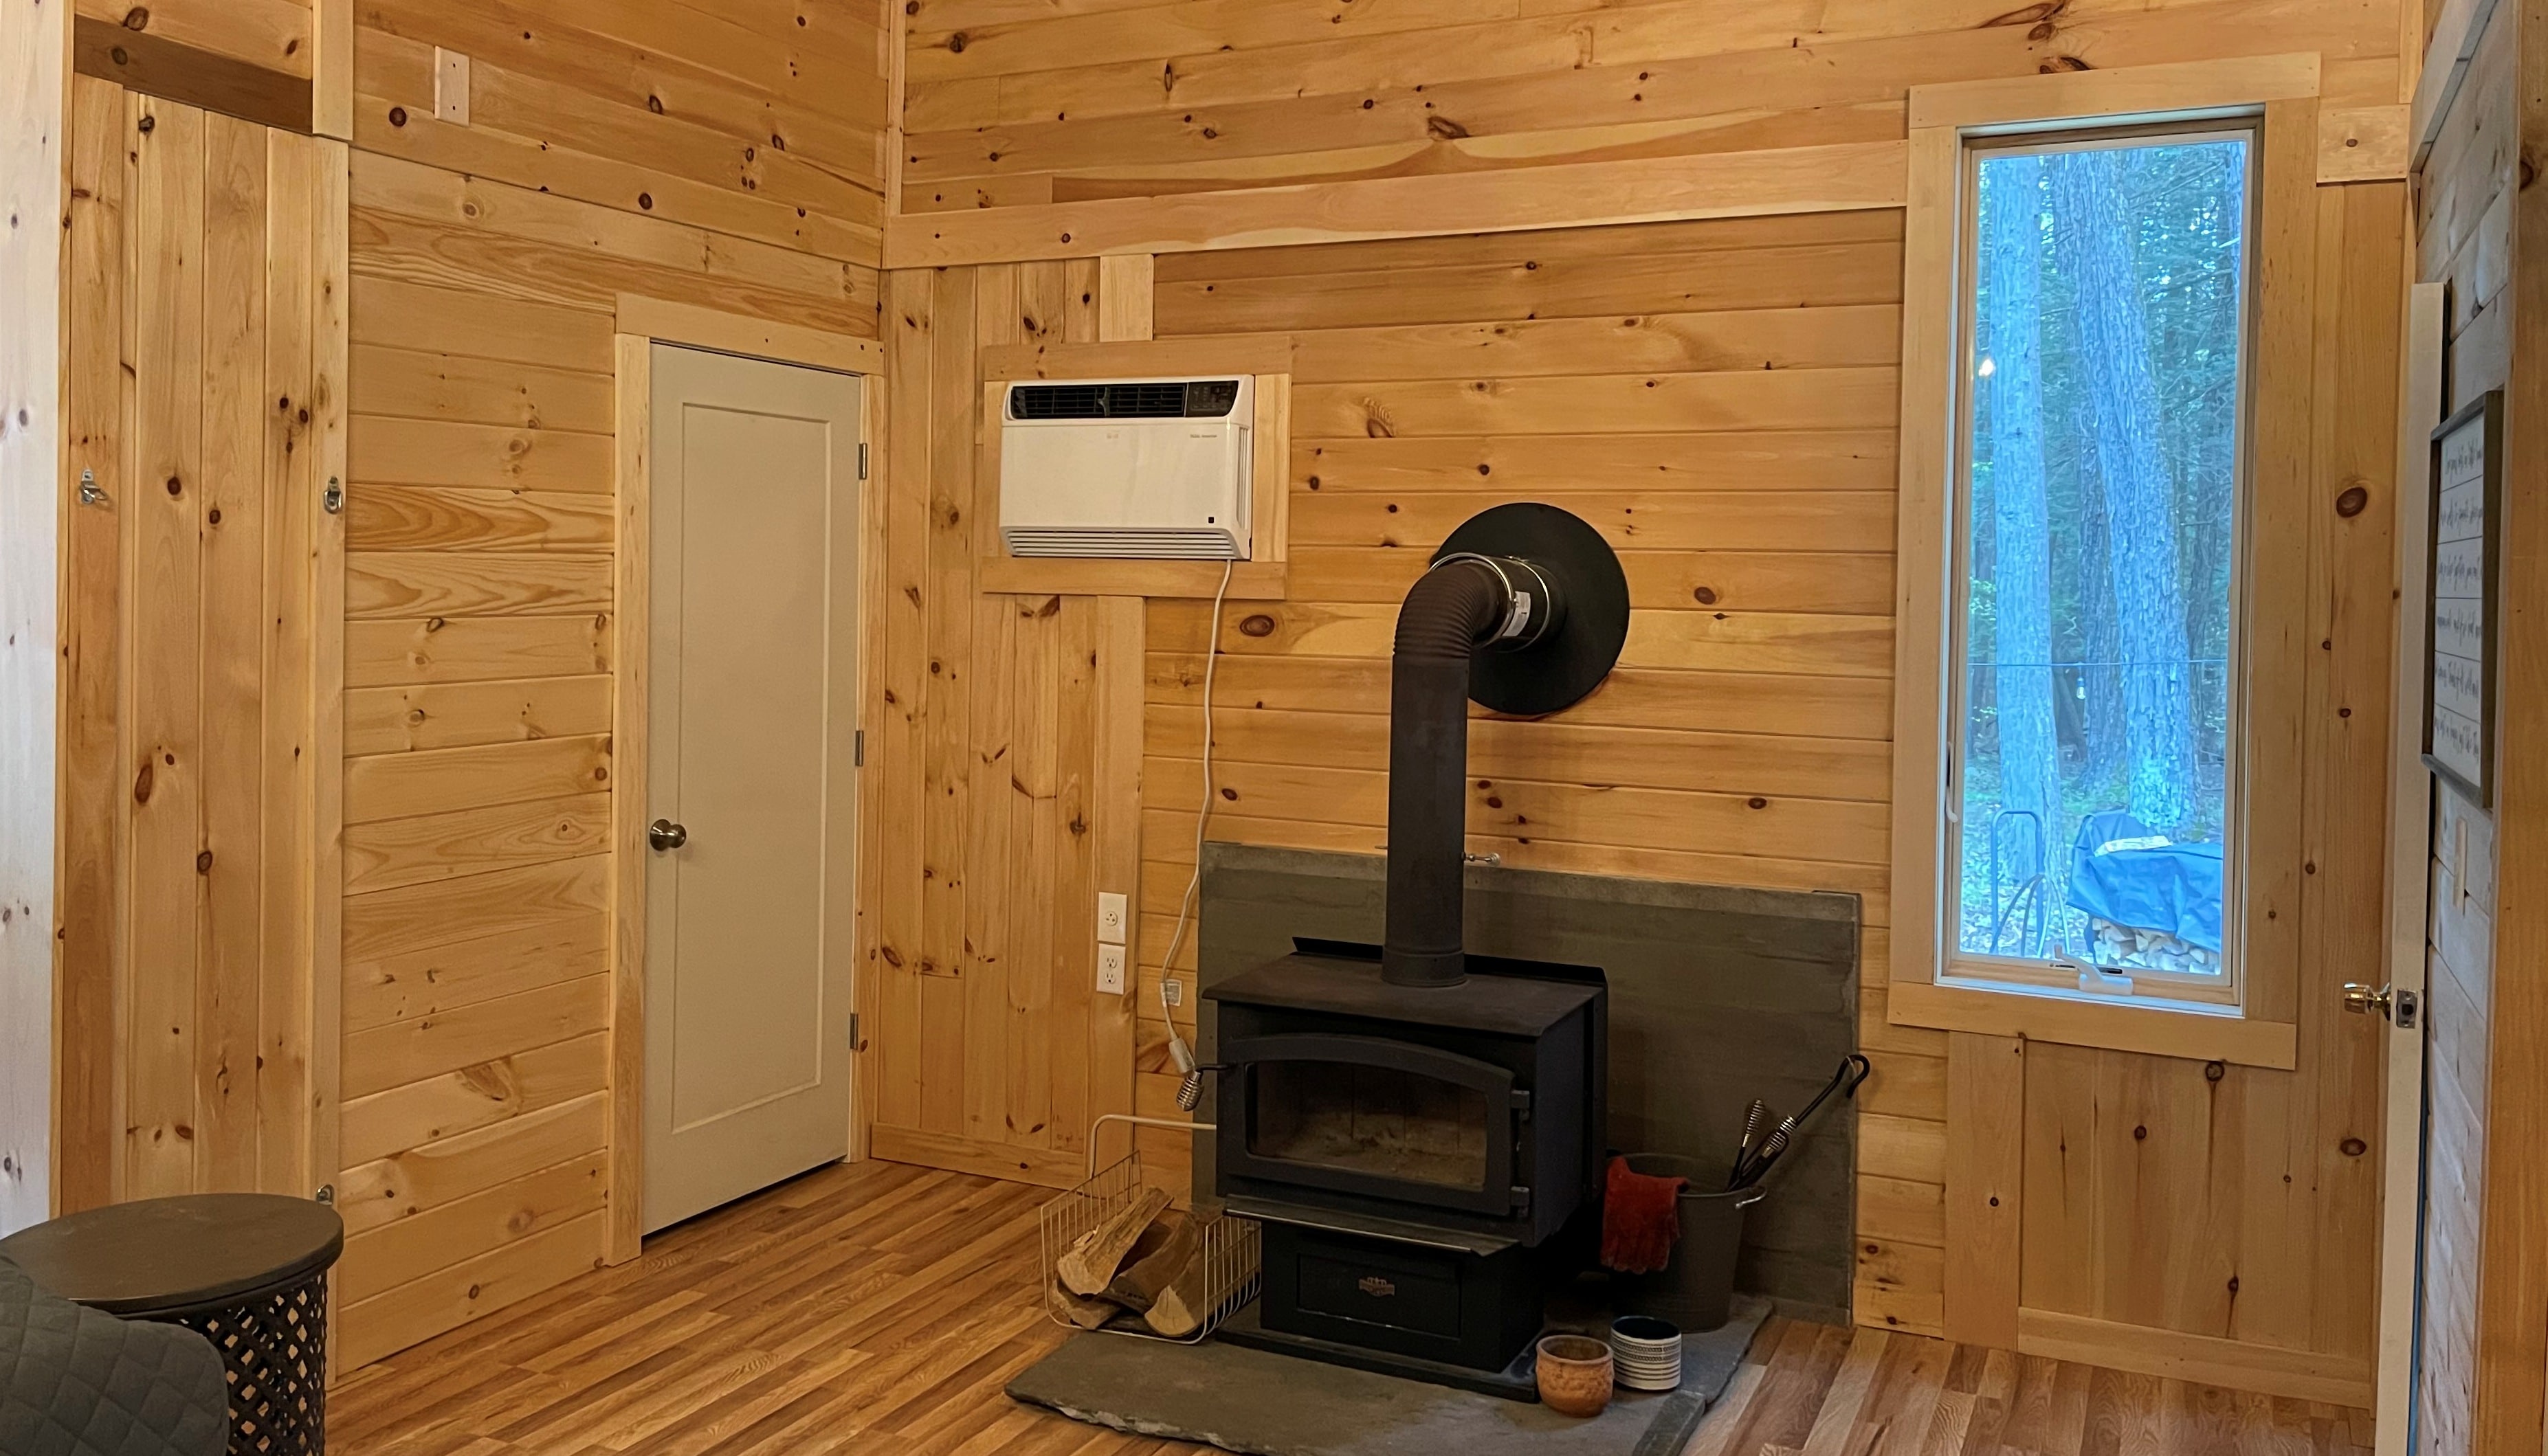 Warm up with the woodstove! Cool off with the a/c!